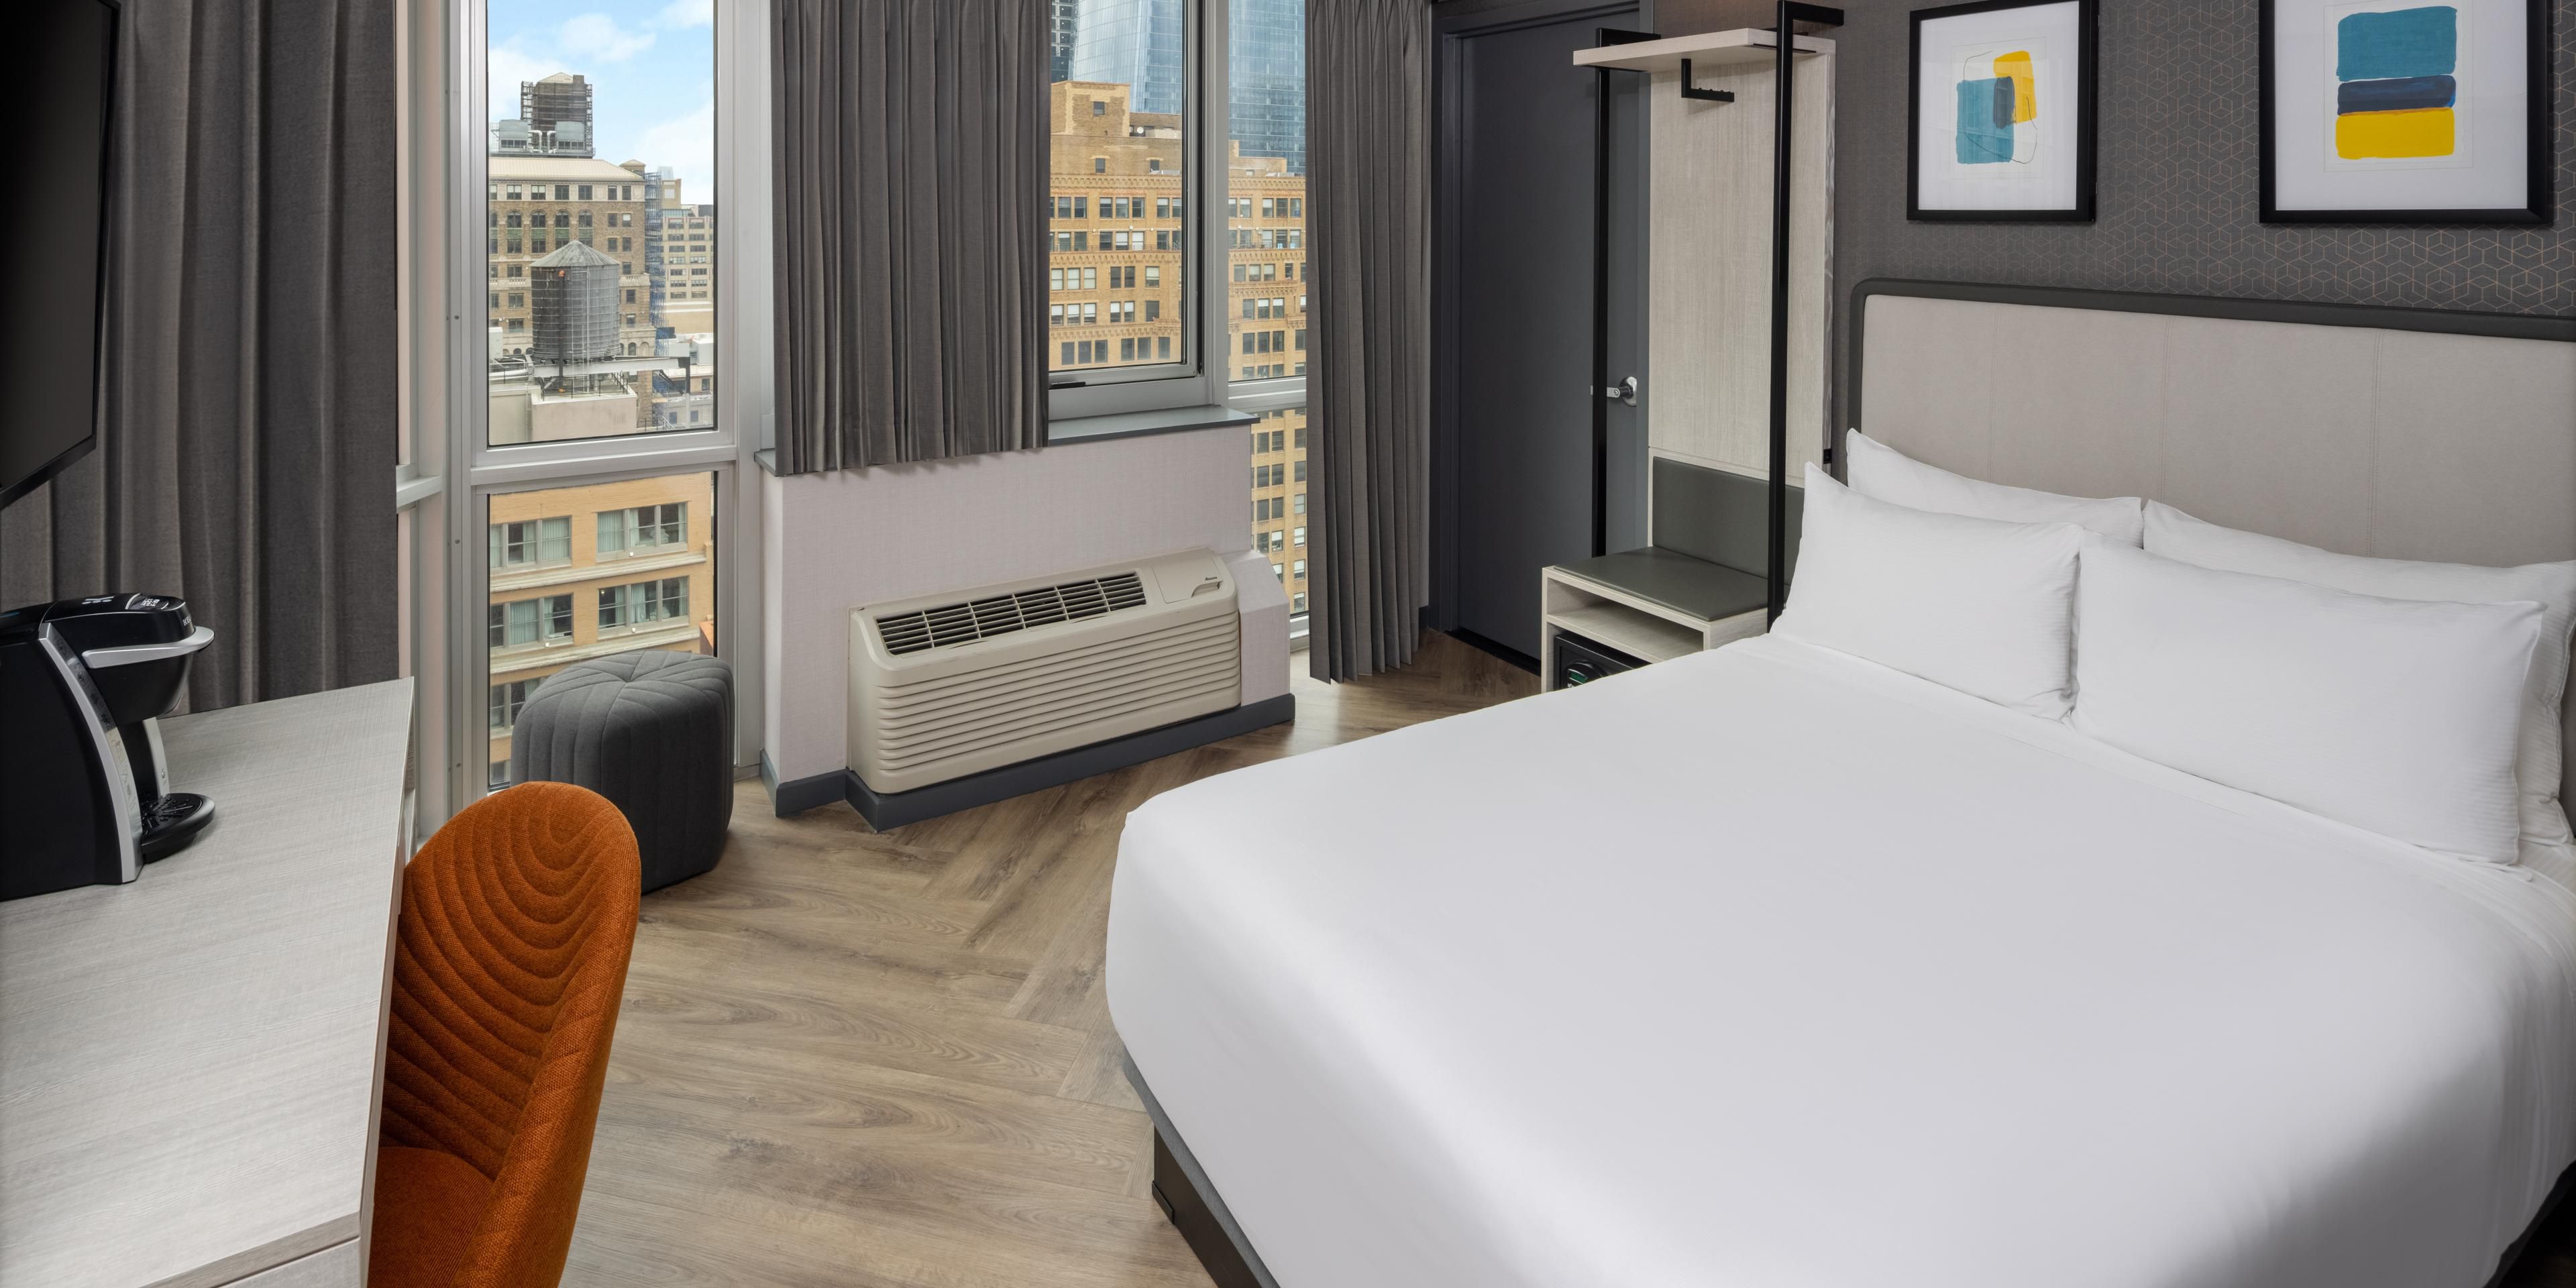 Enjoy views of Manhattan in our queen bed city view rooms.